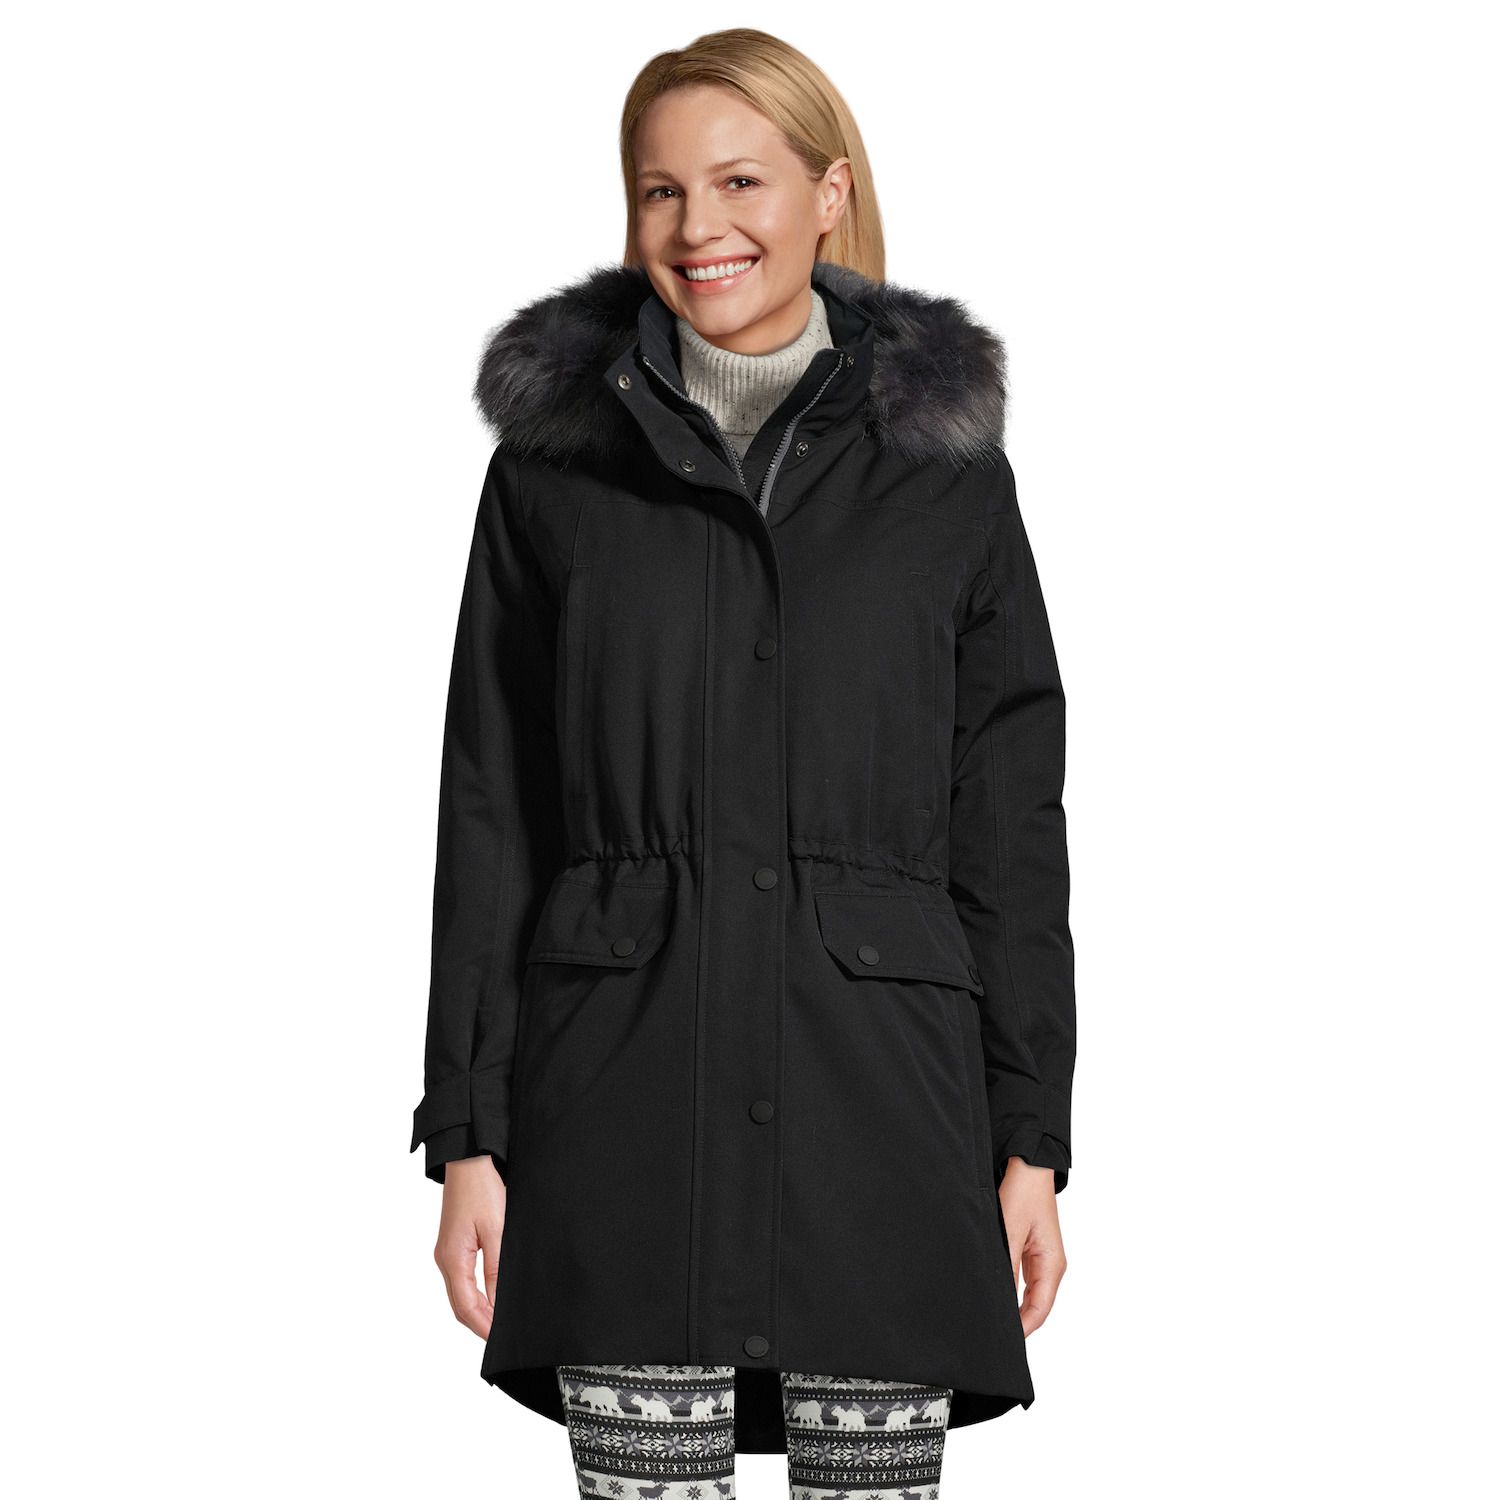 Image for Lands' End Women's Tall Expedition Down Waterproof Winter Parka at Kohl's.